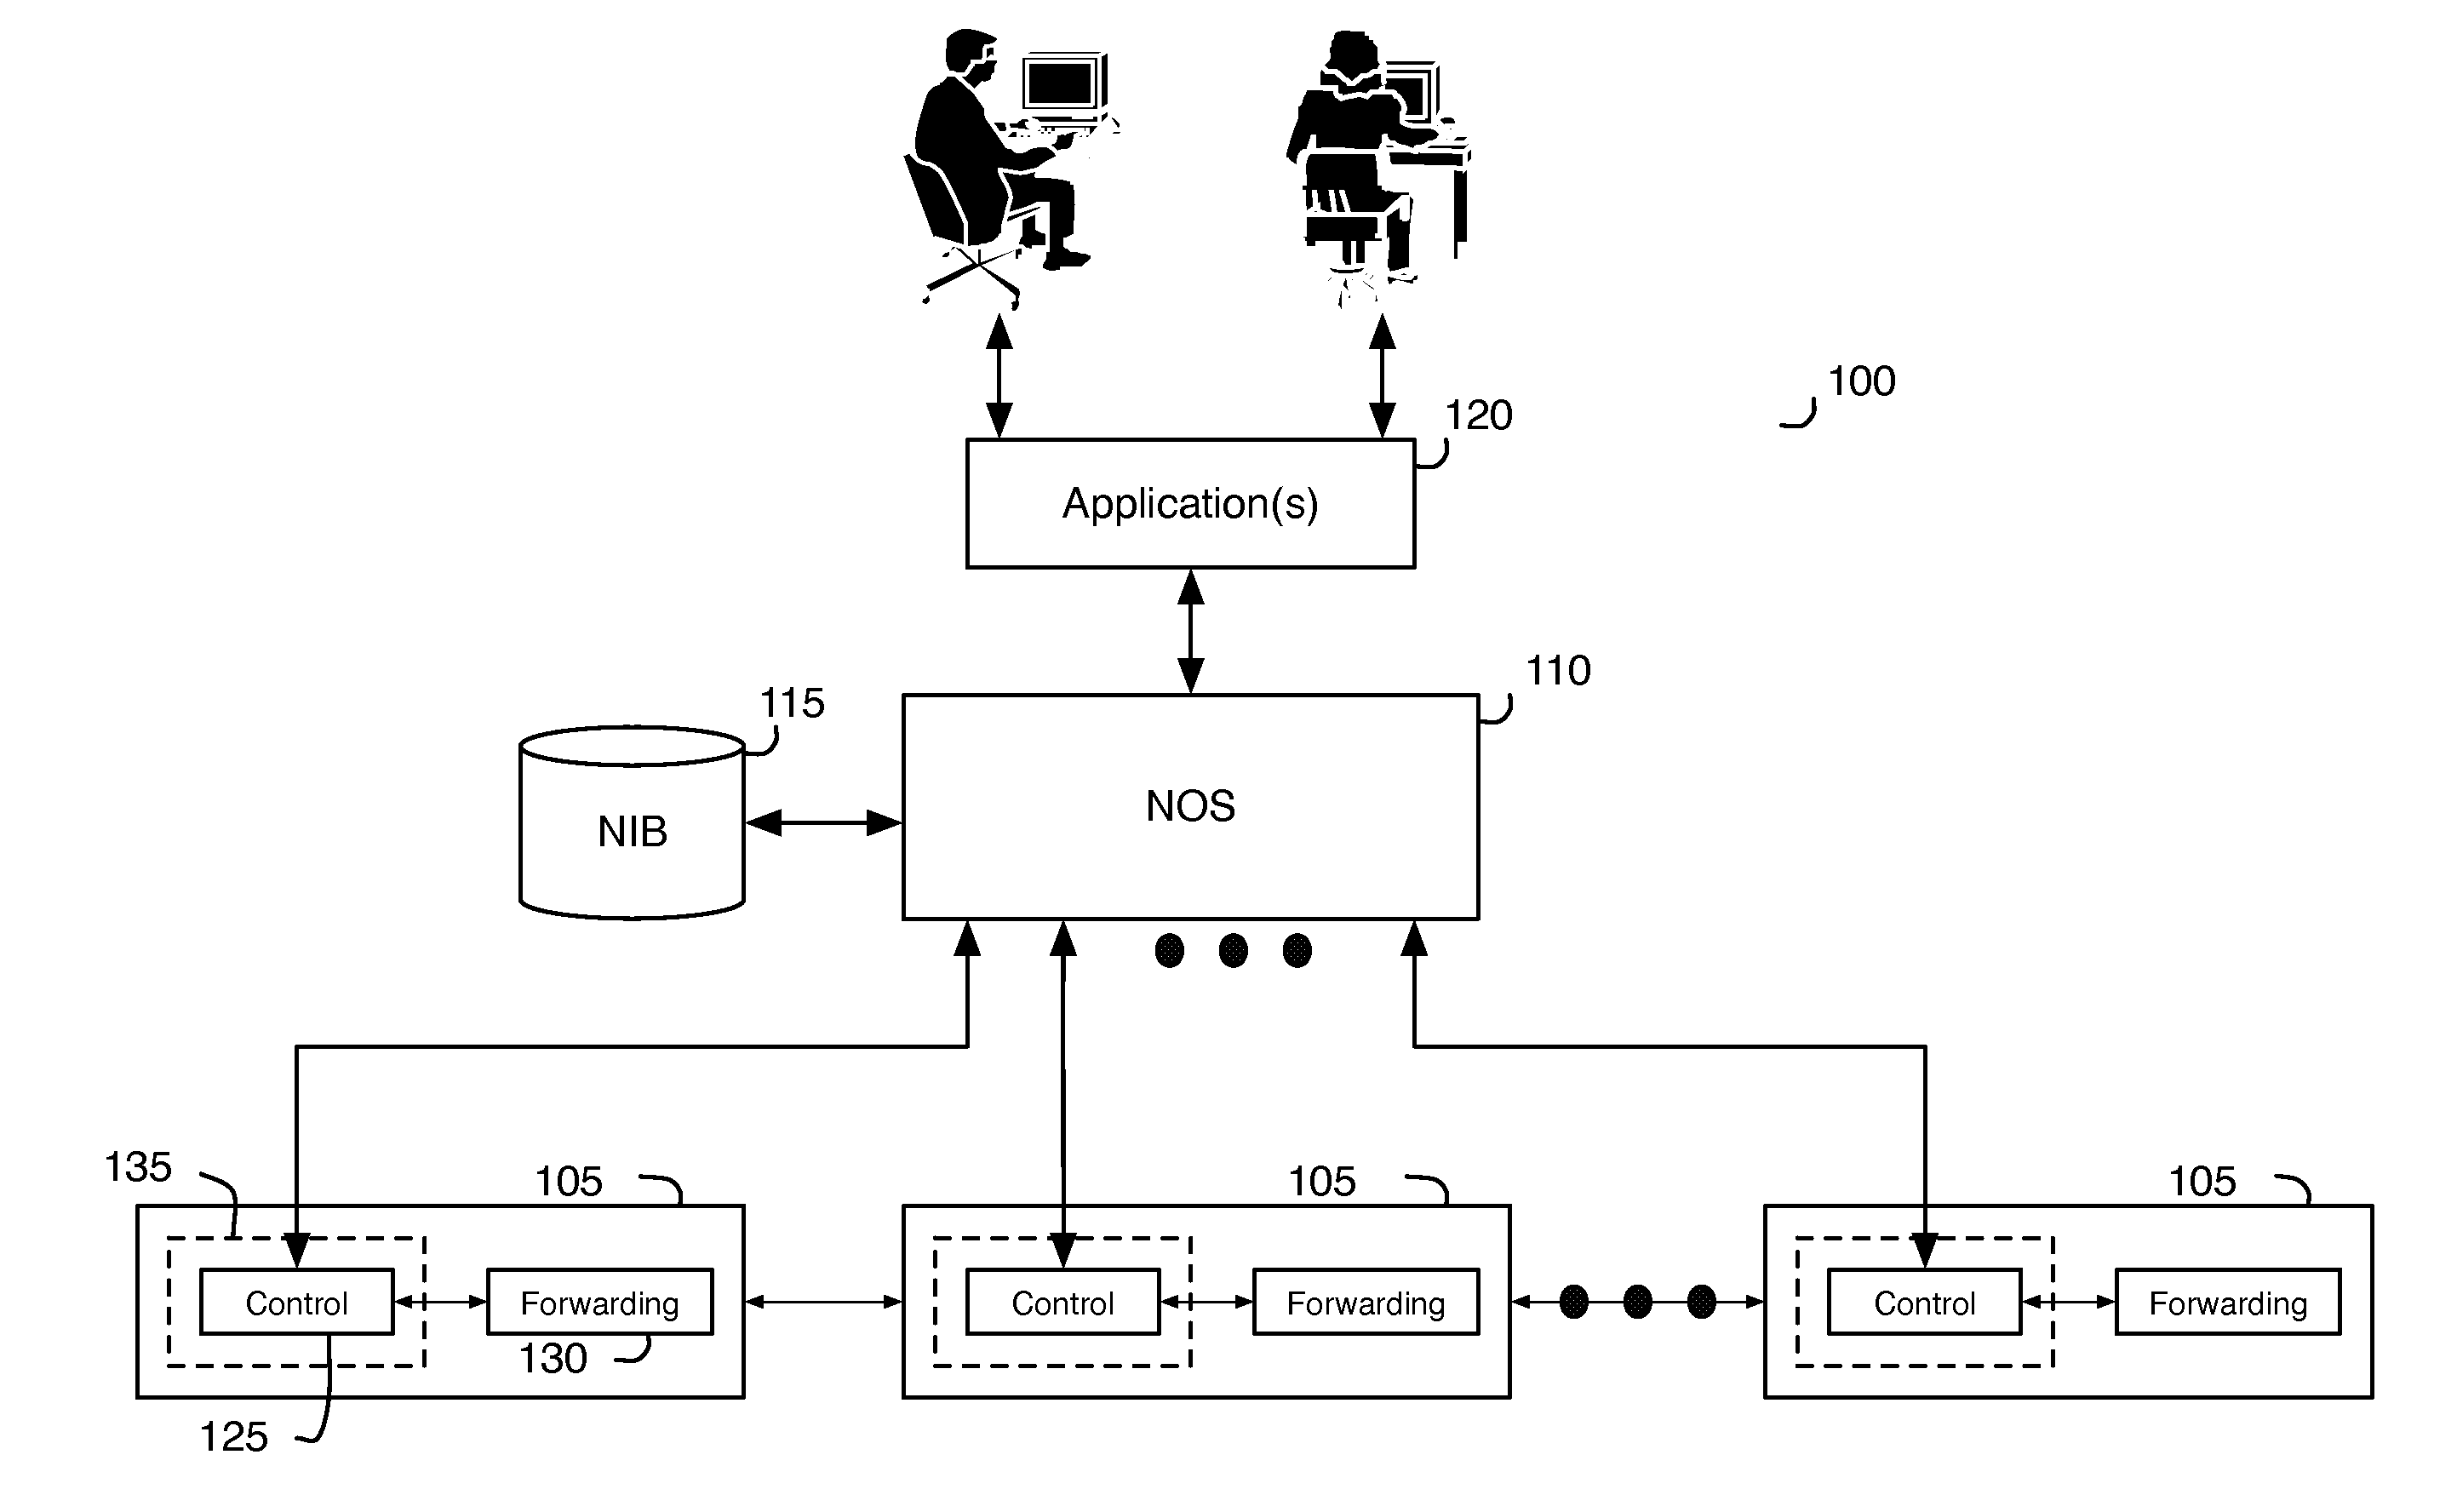 Network control apparatus and method for creating and modifying logical switching elements